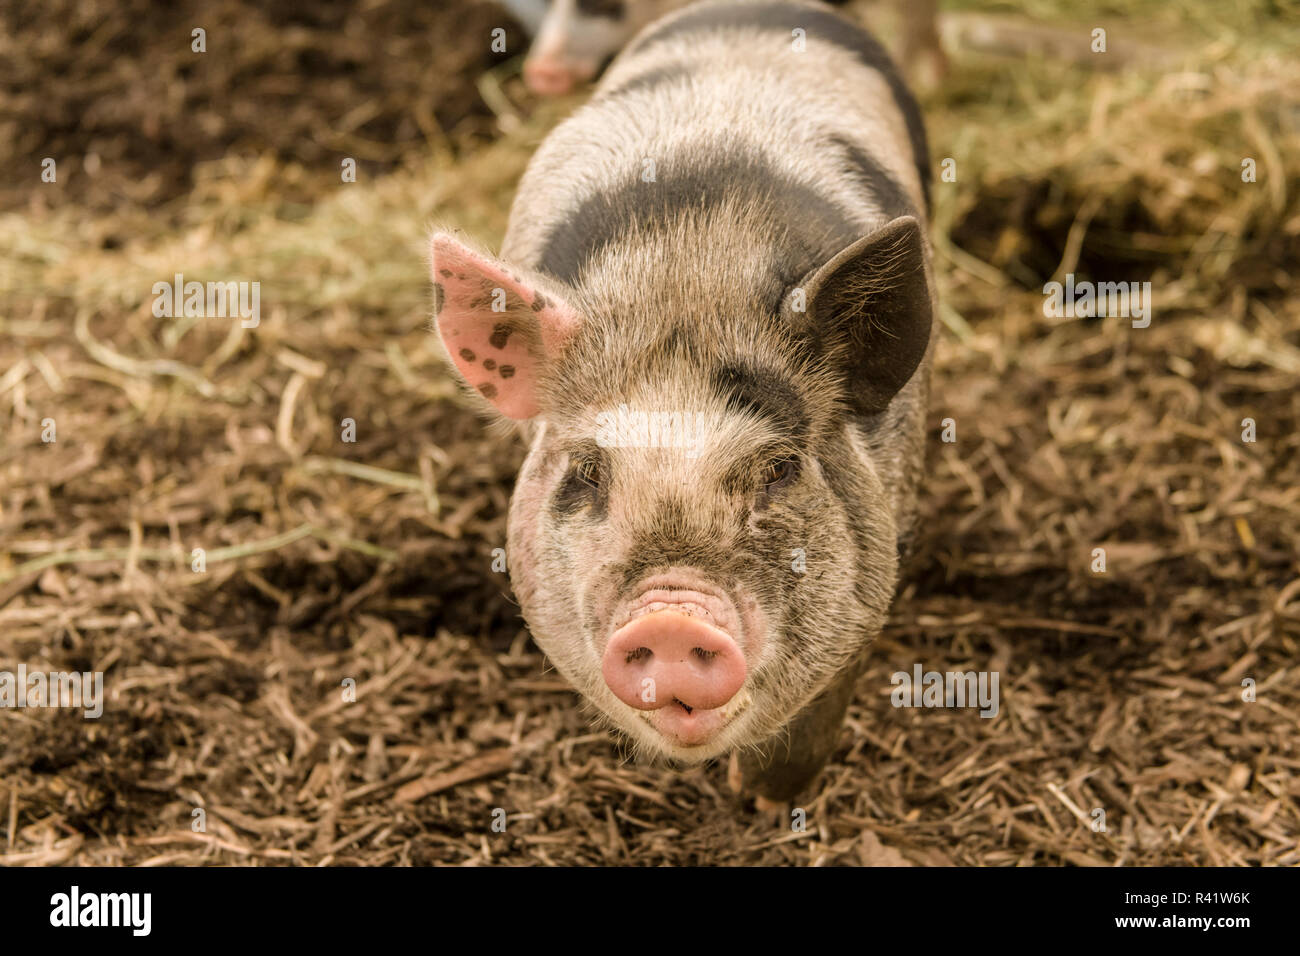 Issaquah, Washington State, USA. The Kunekune is a small breed of domestic pig with a docile, friendly nature, and are now often kept as pets. Stock Photo